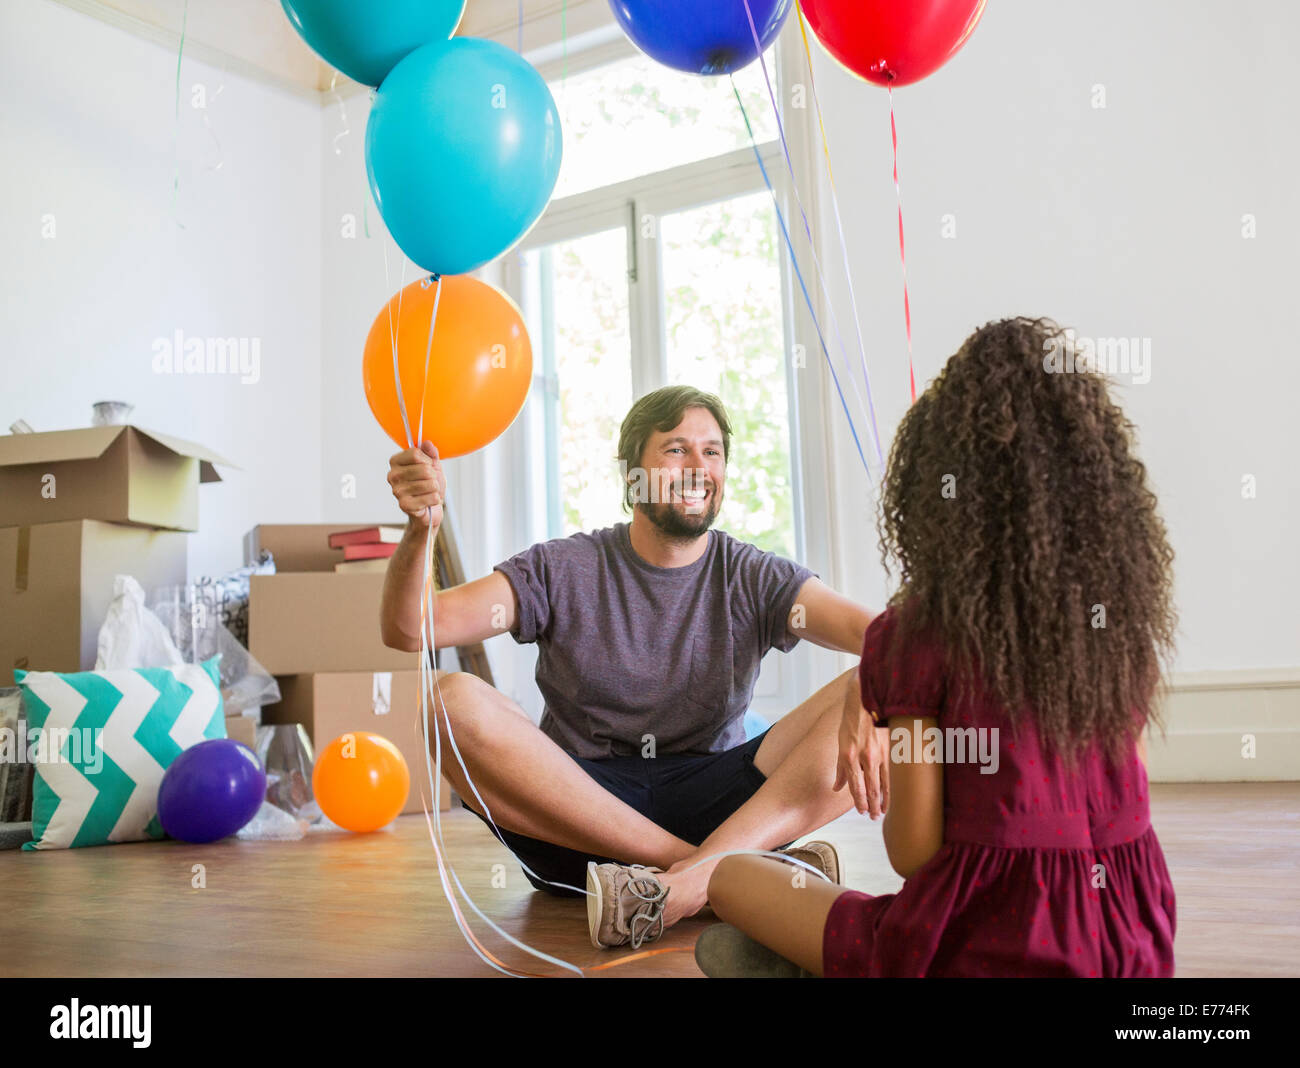 Father and daughter playing with balloons Stock Photo